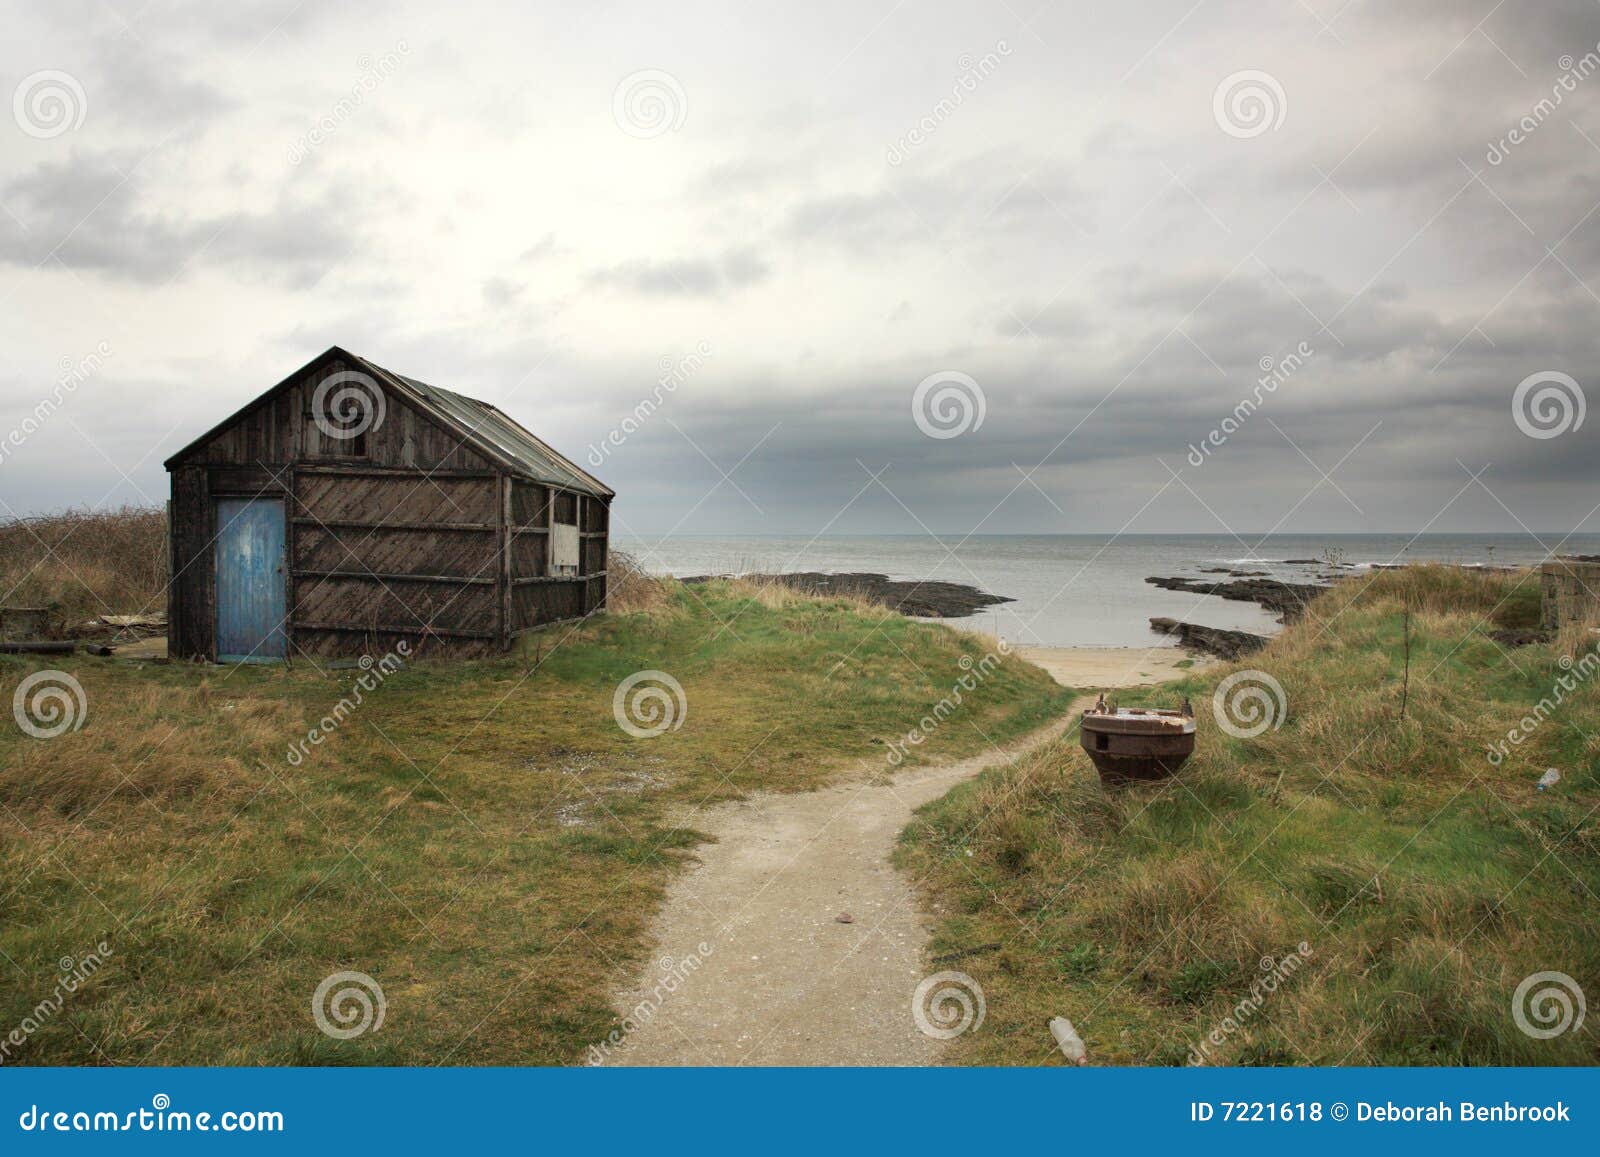 Royalty Free Stock Photos: Old shed, Northumberland